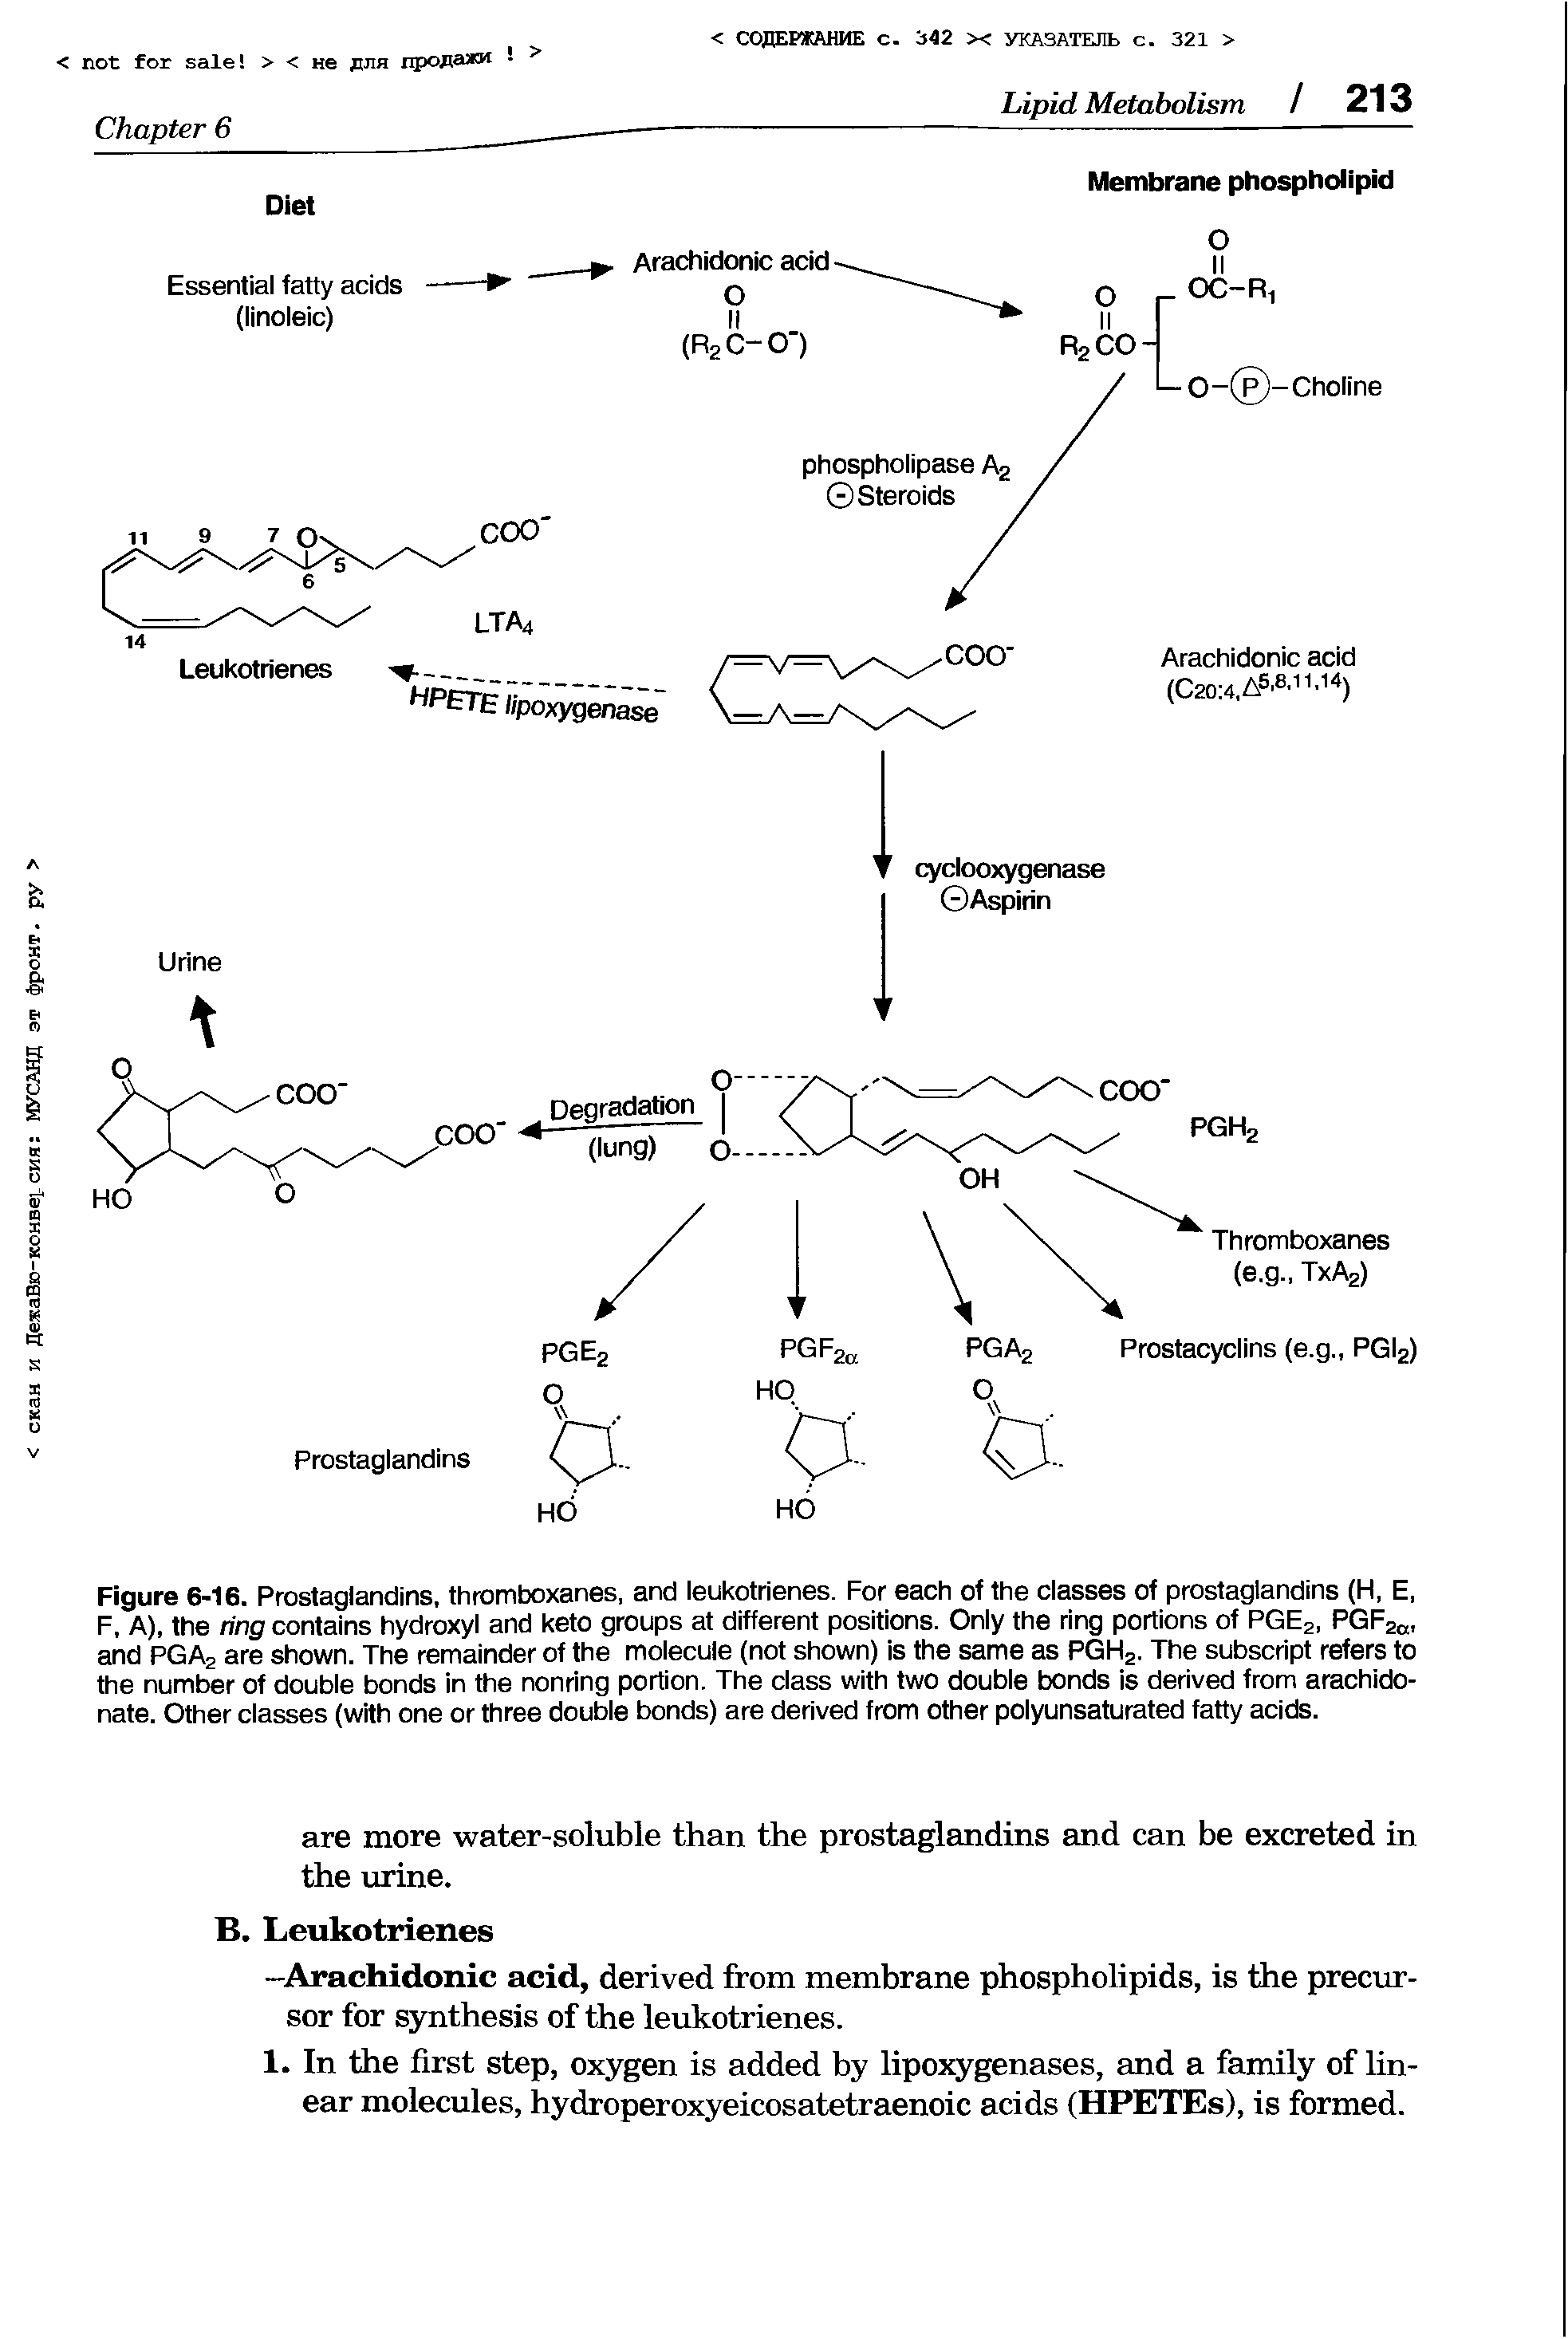 Figure 6-16. Prostaglandins, thromboxanes, and leukotrienes. For each of the classes of prostaglandins (H, E, F, A), the ring contains hydroxyl and keto groups at different positions. Only the ring portions of PGE2, PGF2ct, and PGA2 are shown. The remainder of the molecule (not shown) is the same as PGH2. The subscript refers to the number of double bonds in the nonring portion. The class with two double bonds is derived from arachido-nate. Other classes (with one or three double bonds) are derived from other polyunsaturated fatty acids.